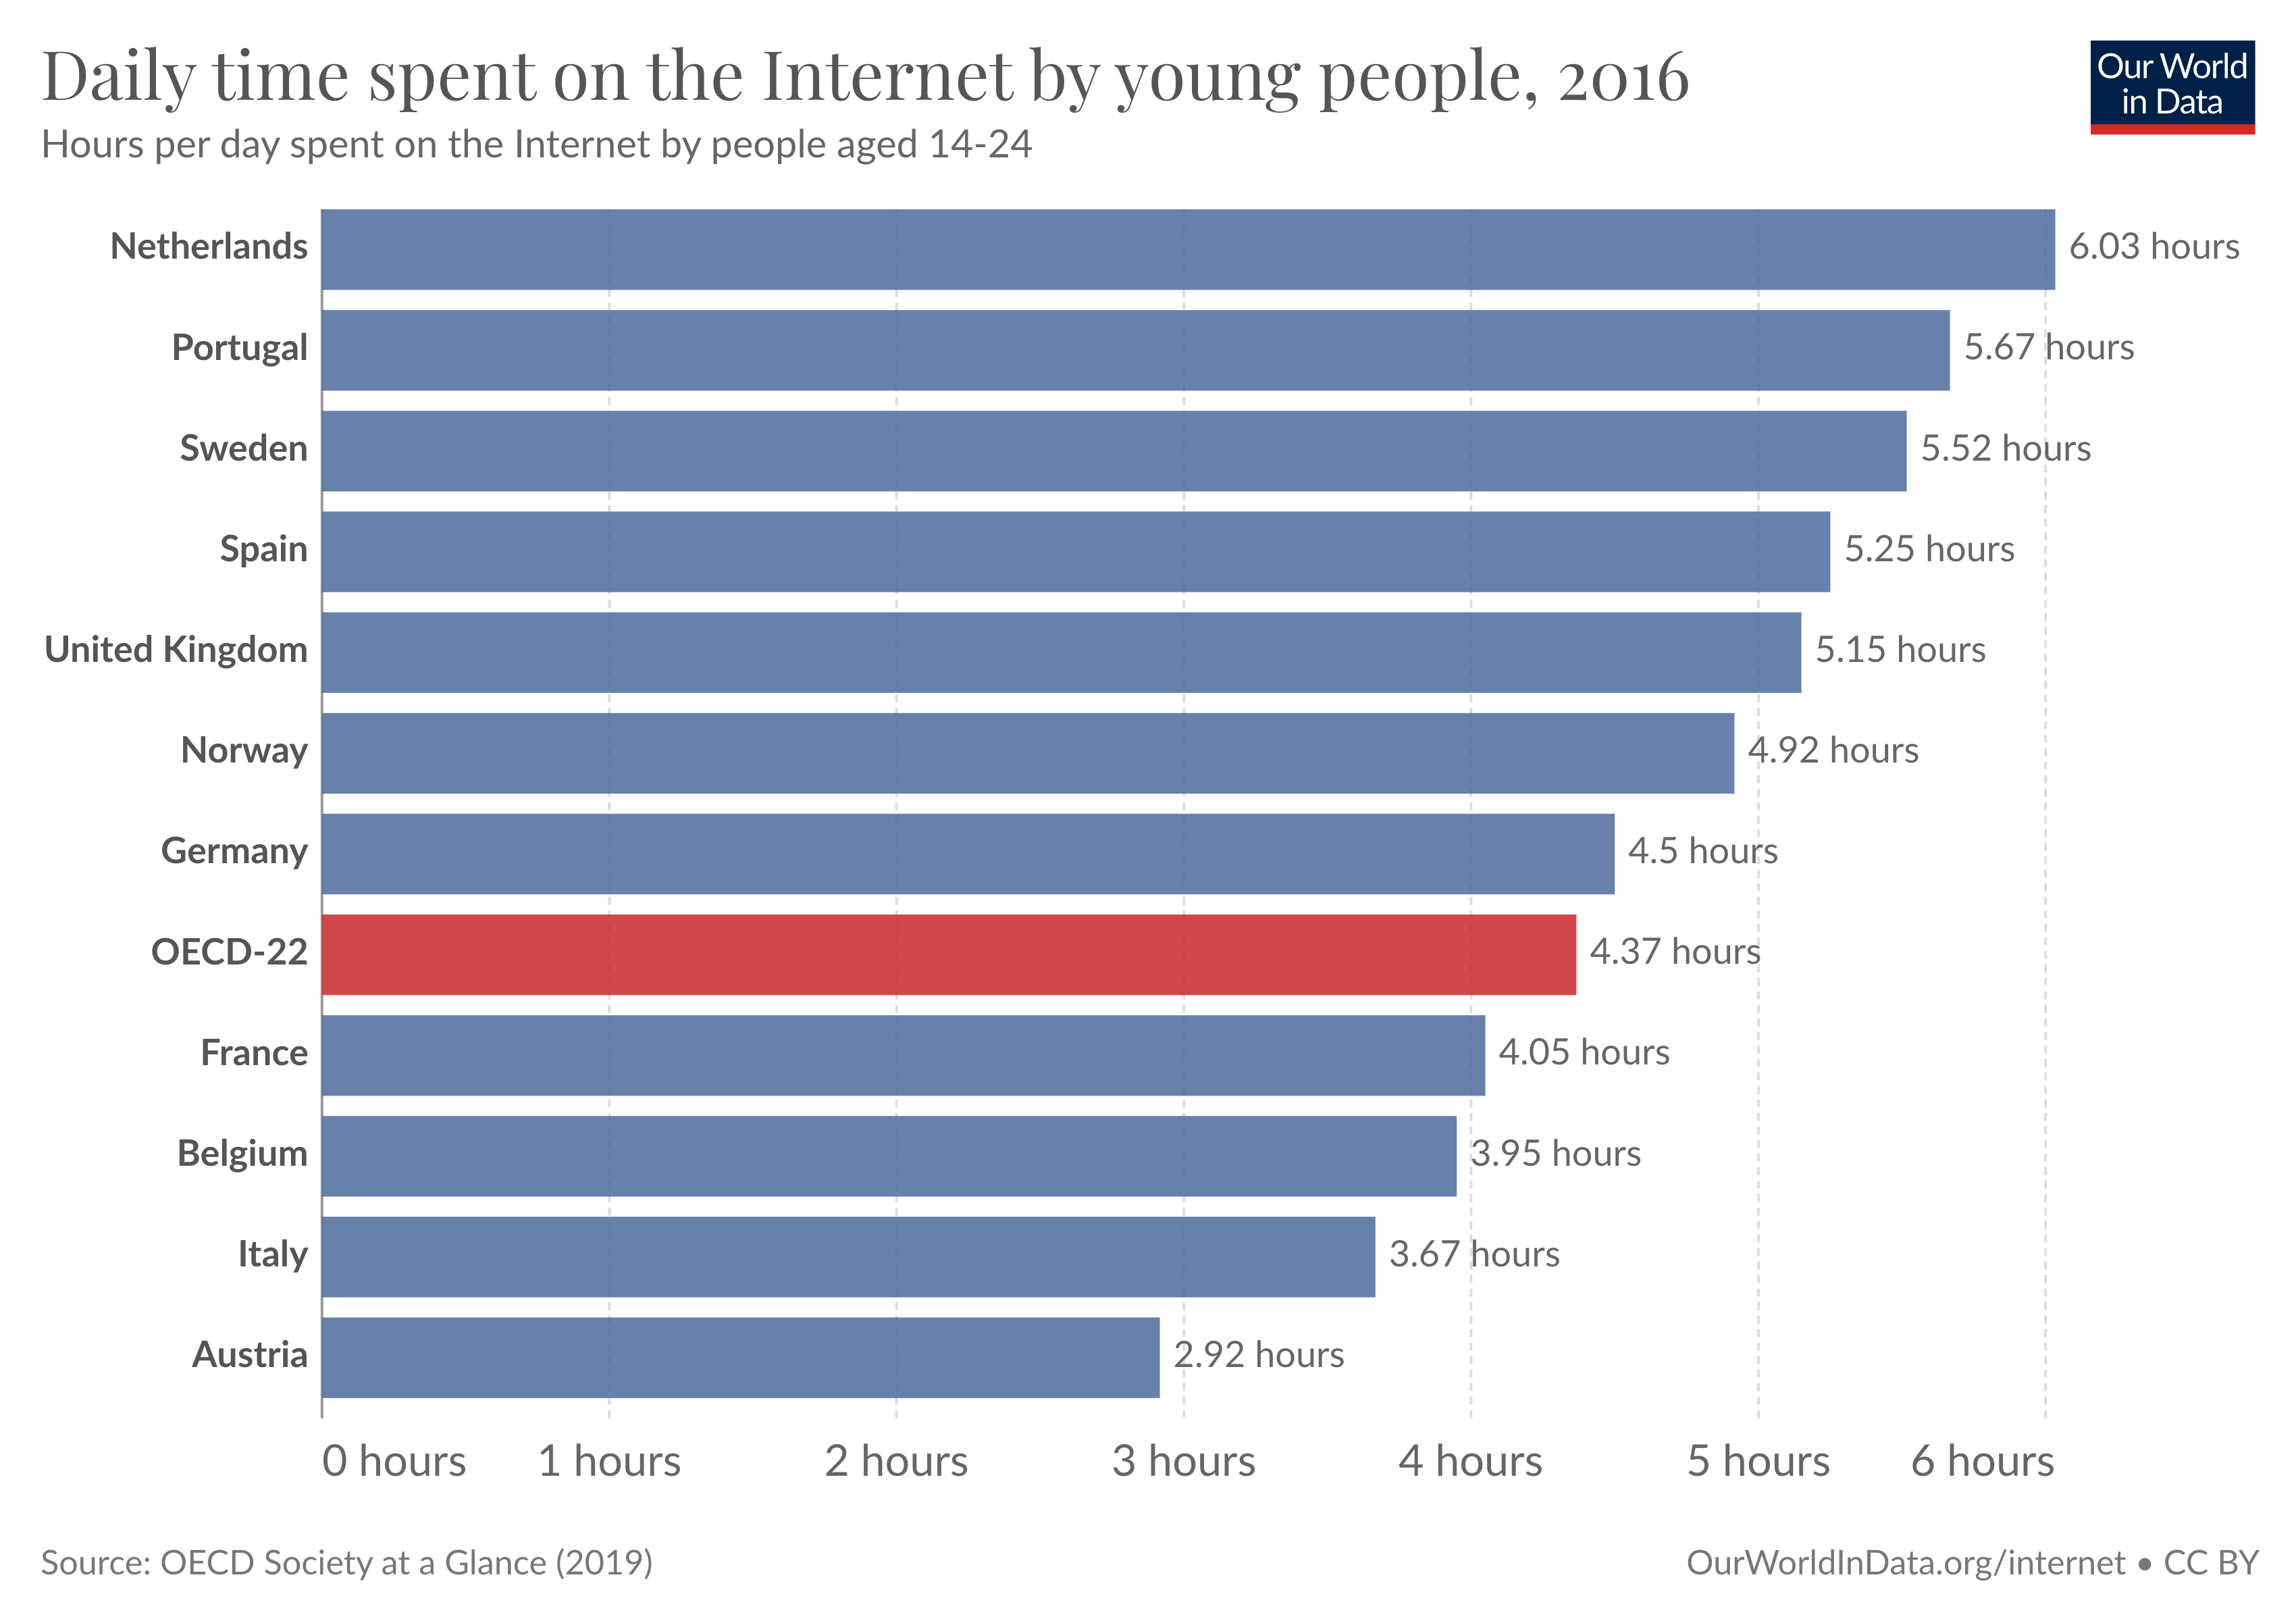 Bar chart of the time spent on the internet per day among young people, showing that most spend at least 4 hours.